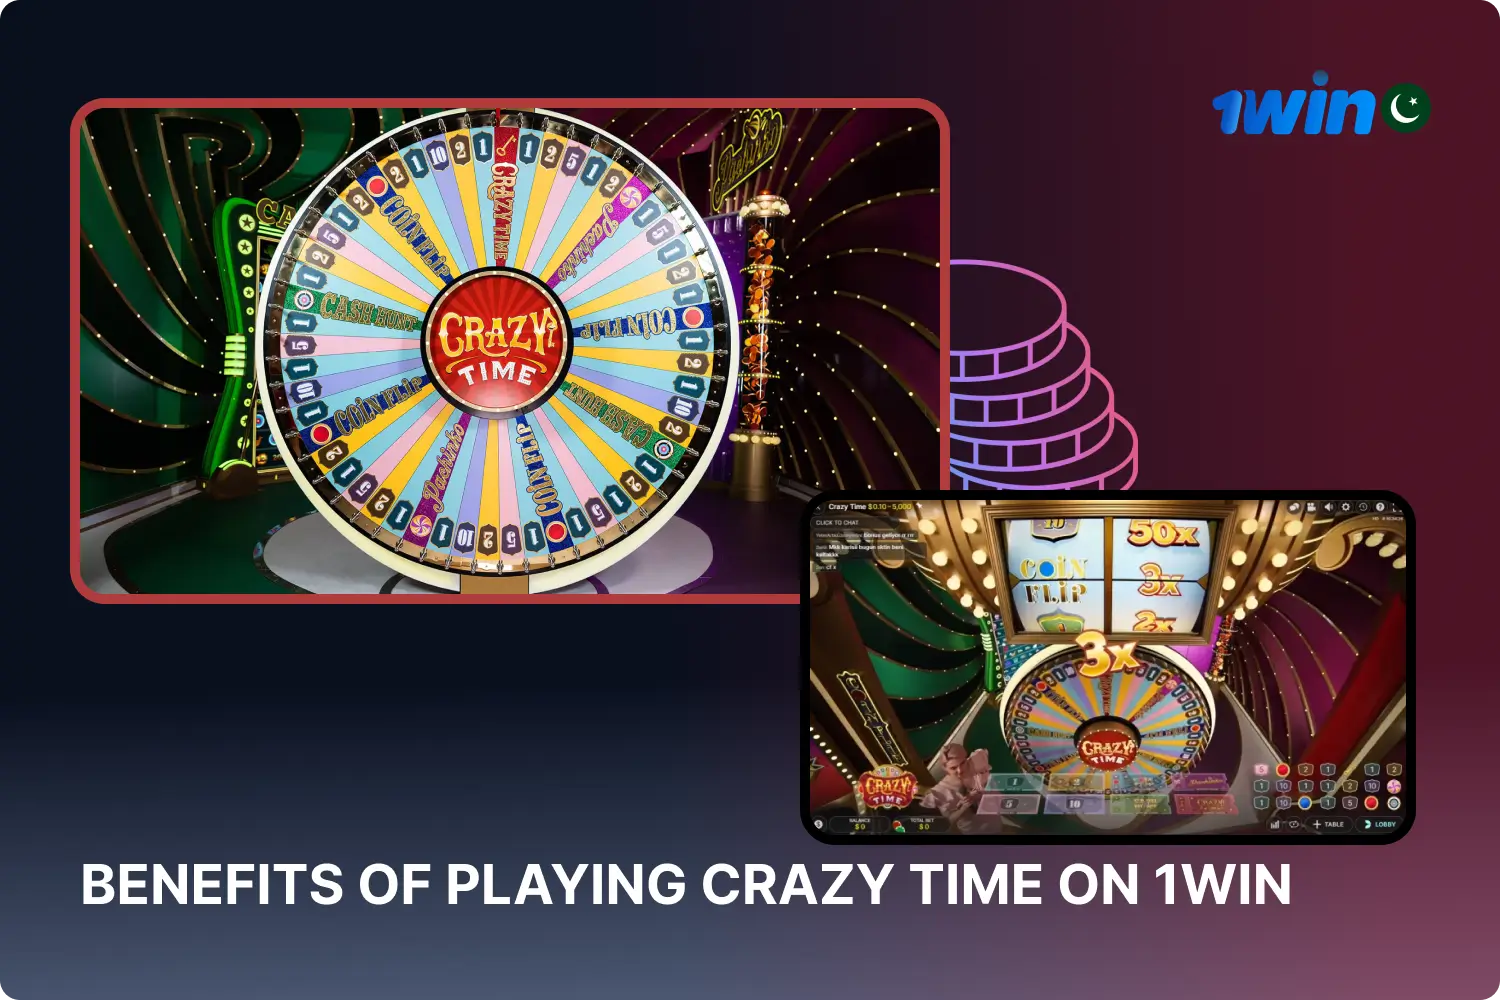 Gamblers from Pakistan can play Crazy Time and enjoy all its advantages at the 1win casino